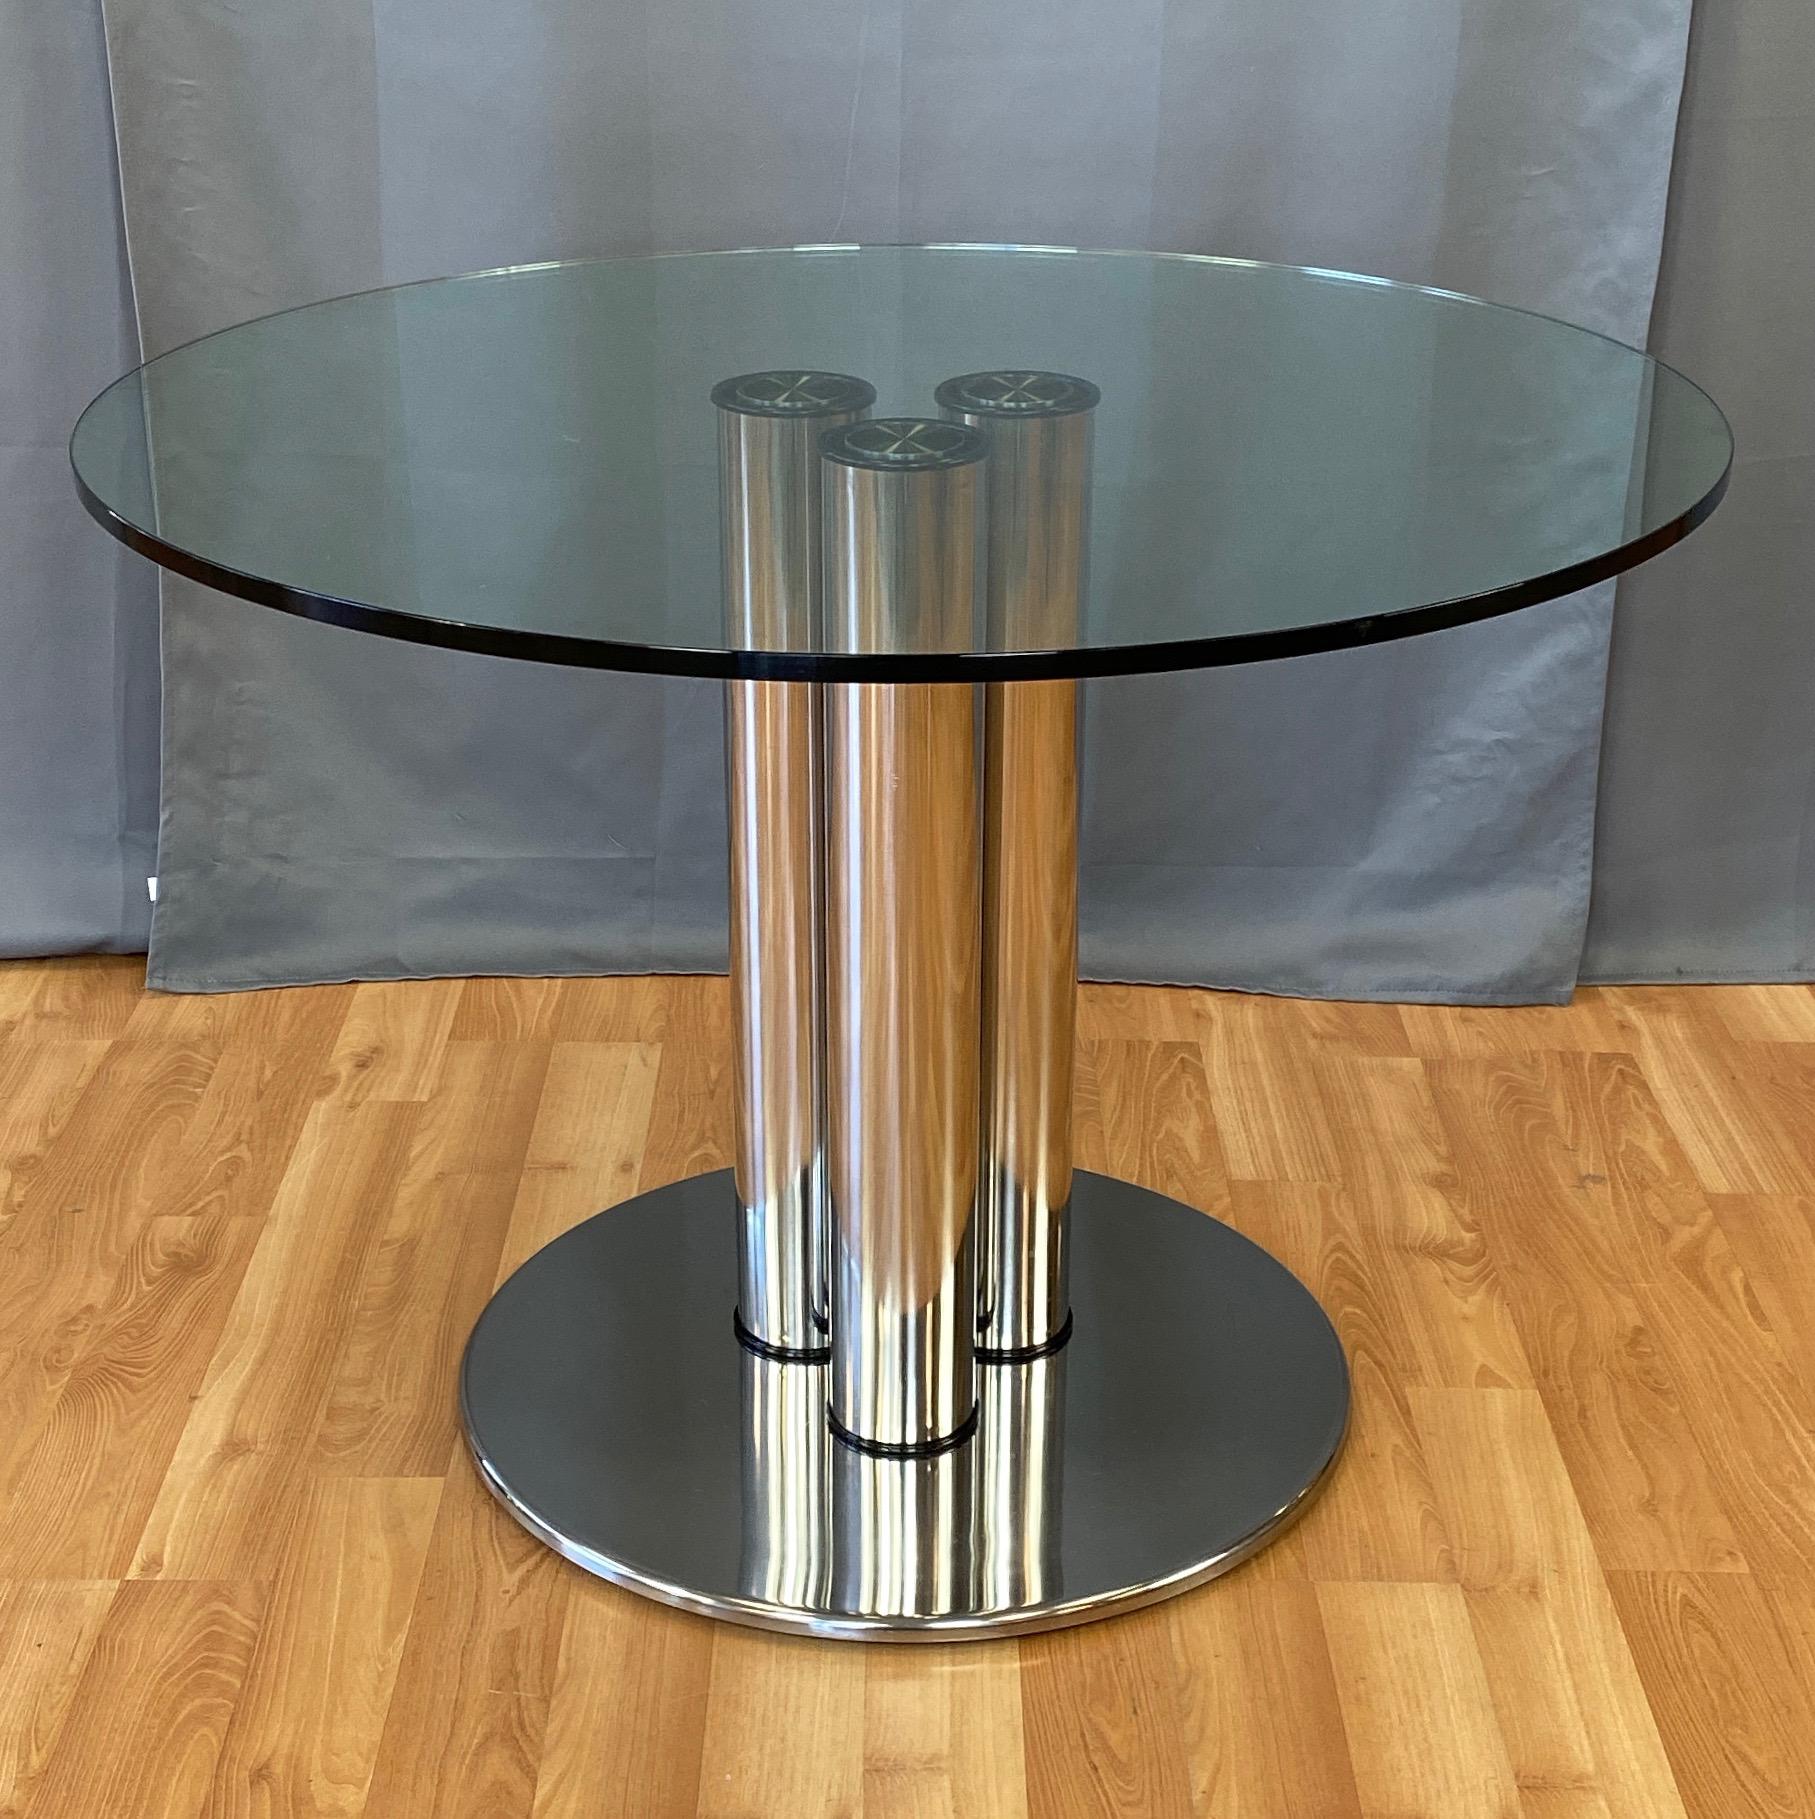 An impressive 1970 polished stainless steel and glass model 2532 Marcuso dining table by important and influential Italian architect and designer Marco Zanuso for Zanotta.

Modernist architectural form comprised of a trio of four inch diameter